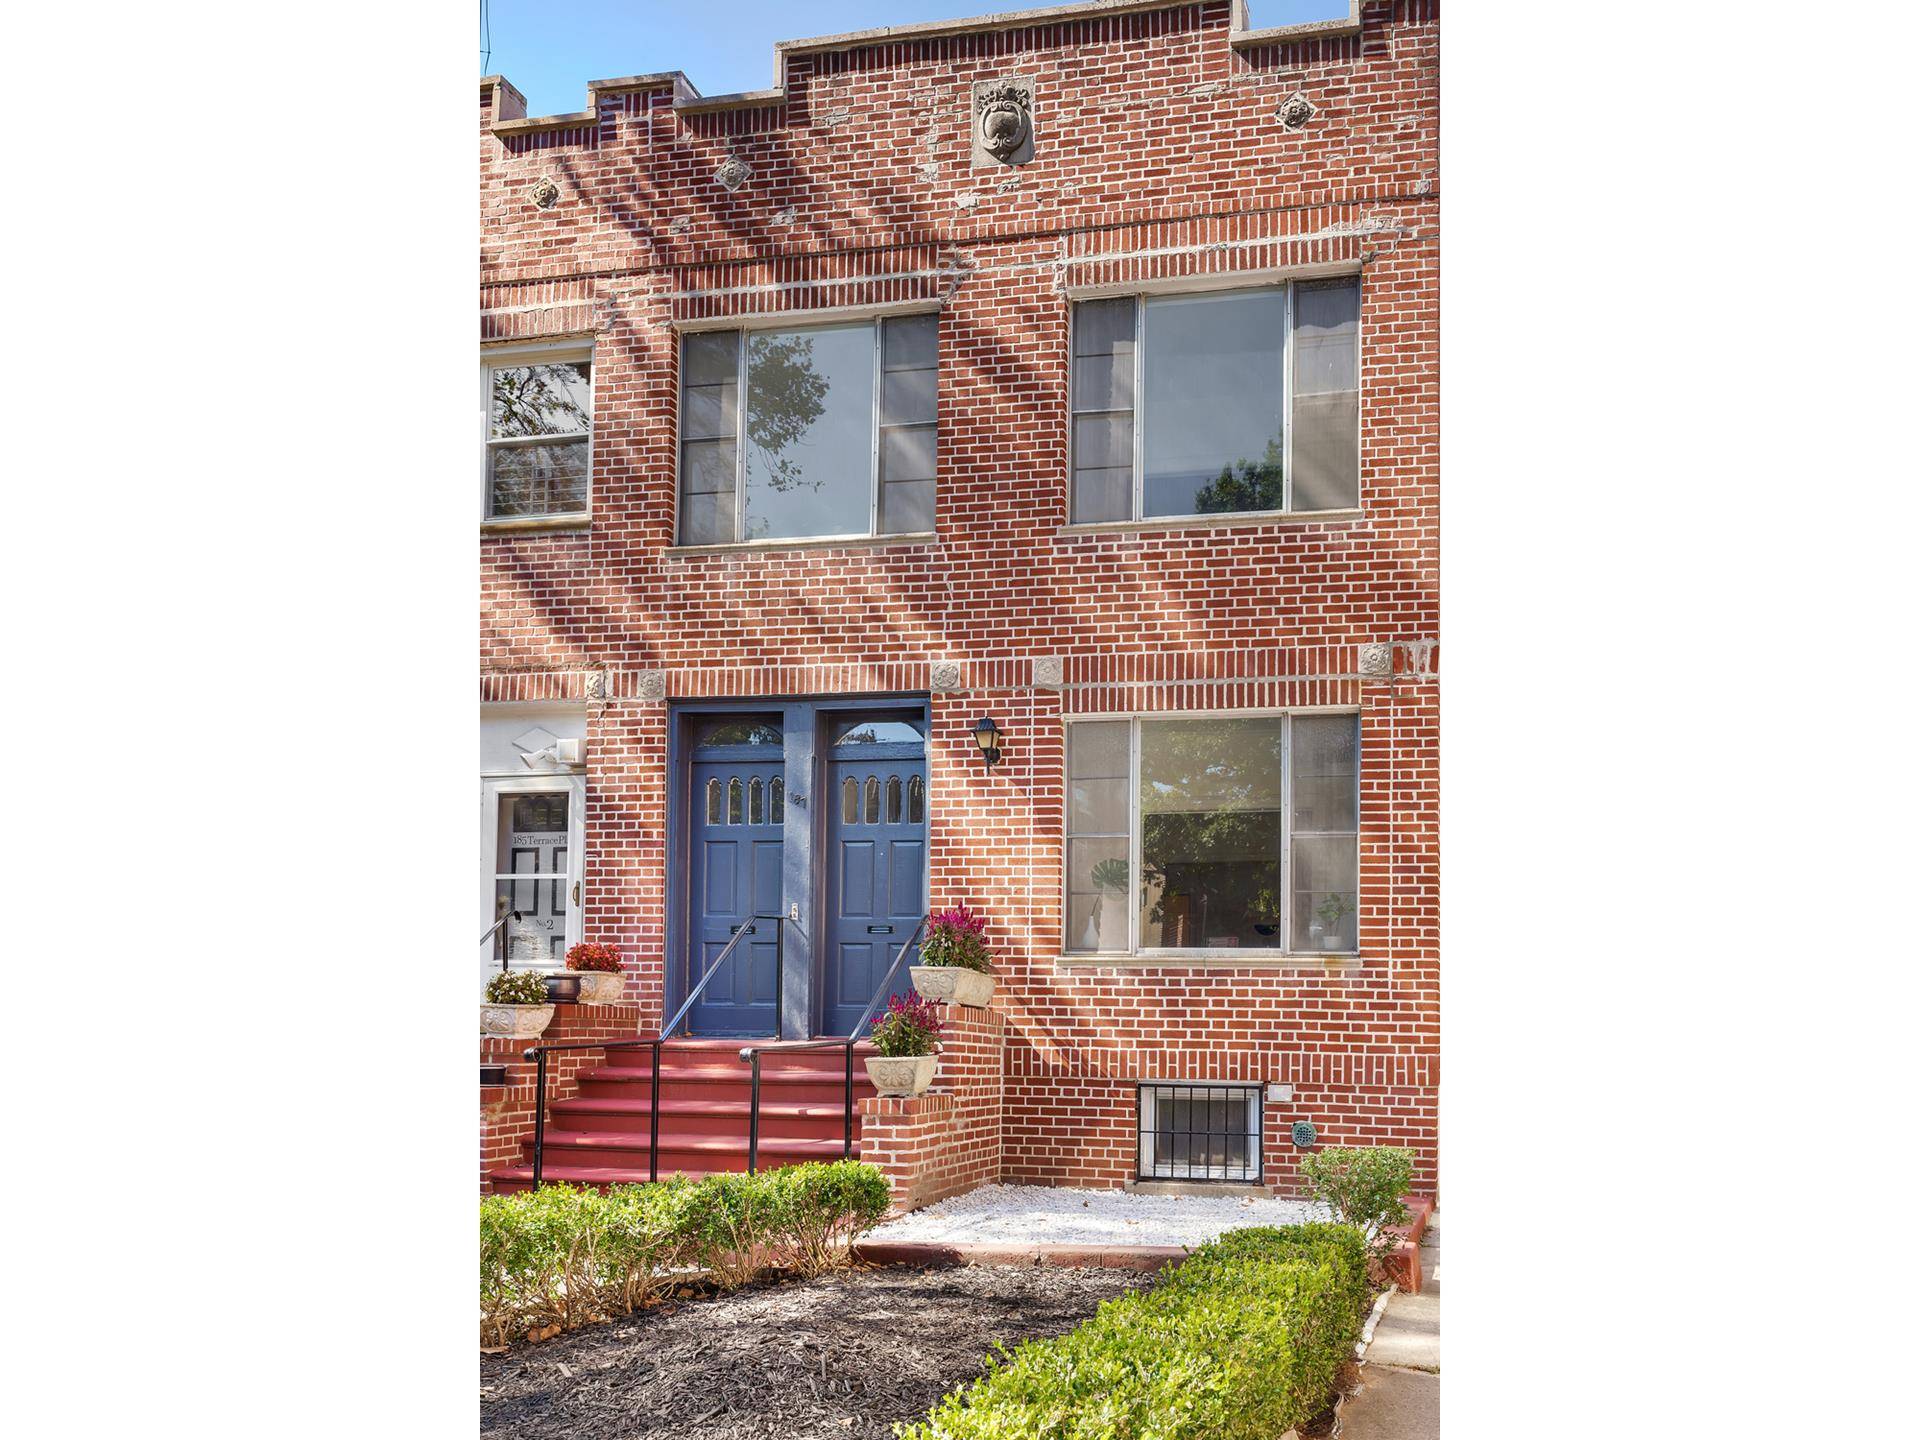 A two family brick house in prime Windsor Terrace.